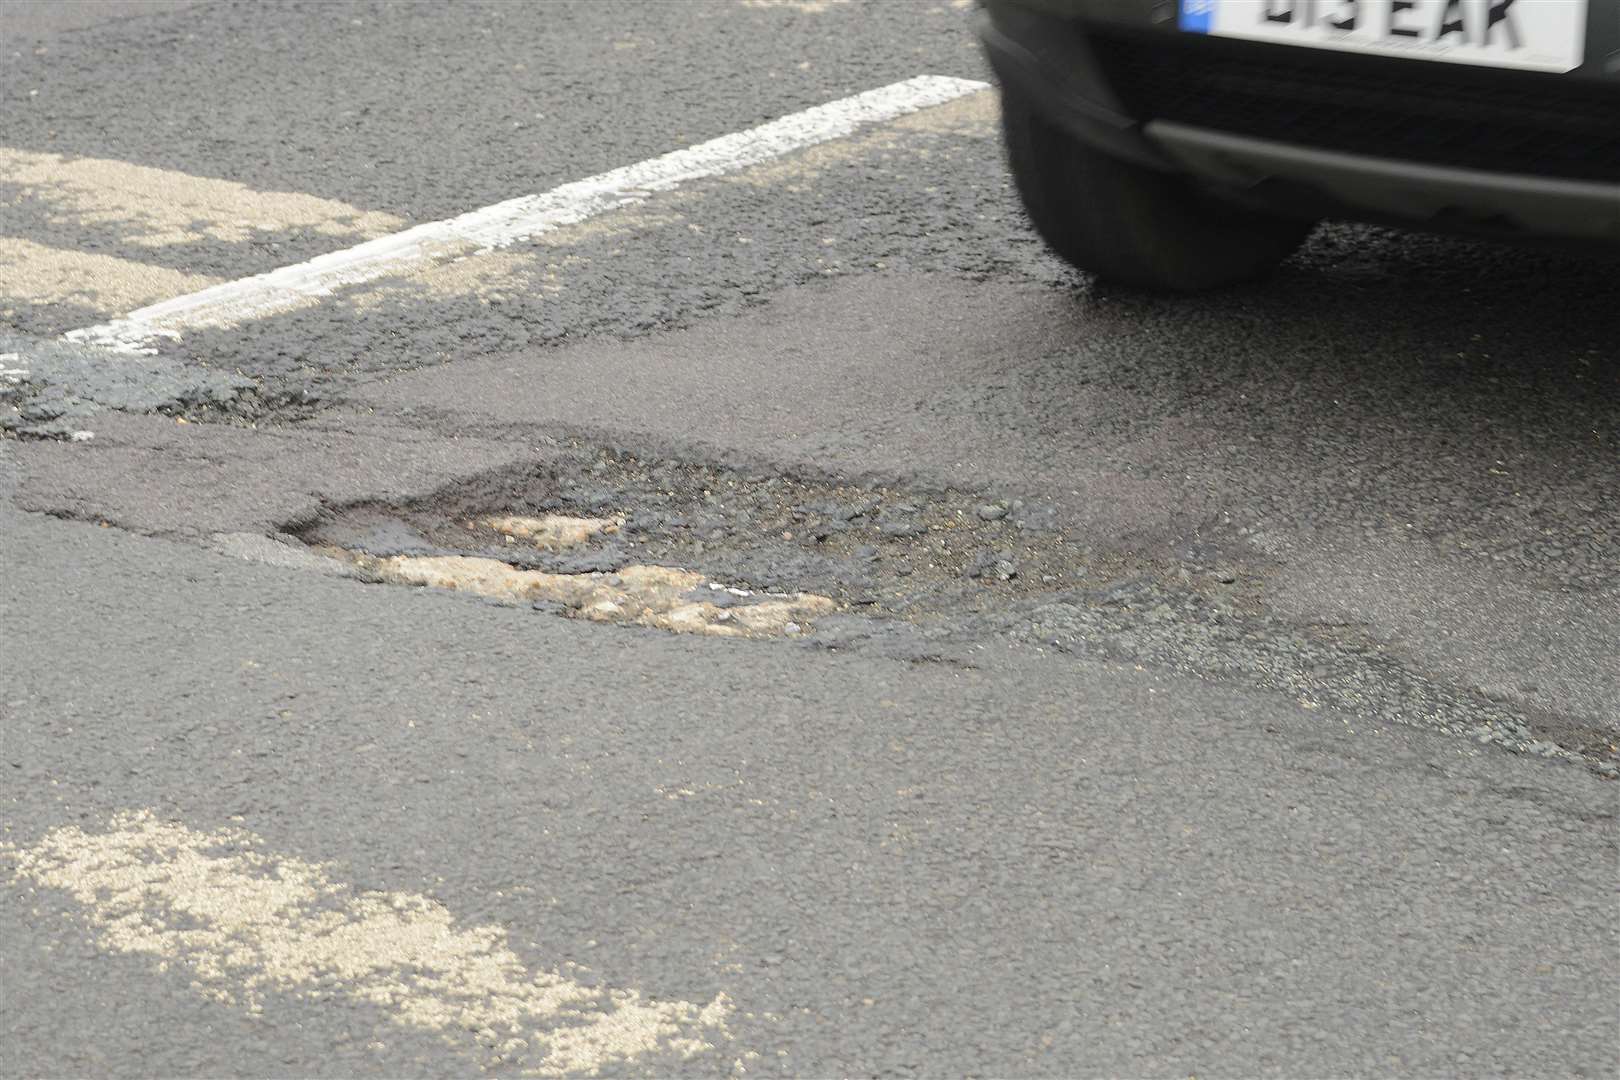 Drivers are worried the potholes will cause an acident